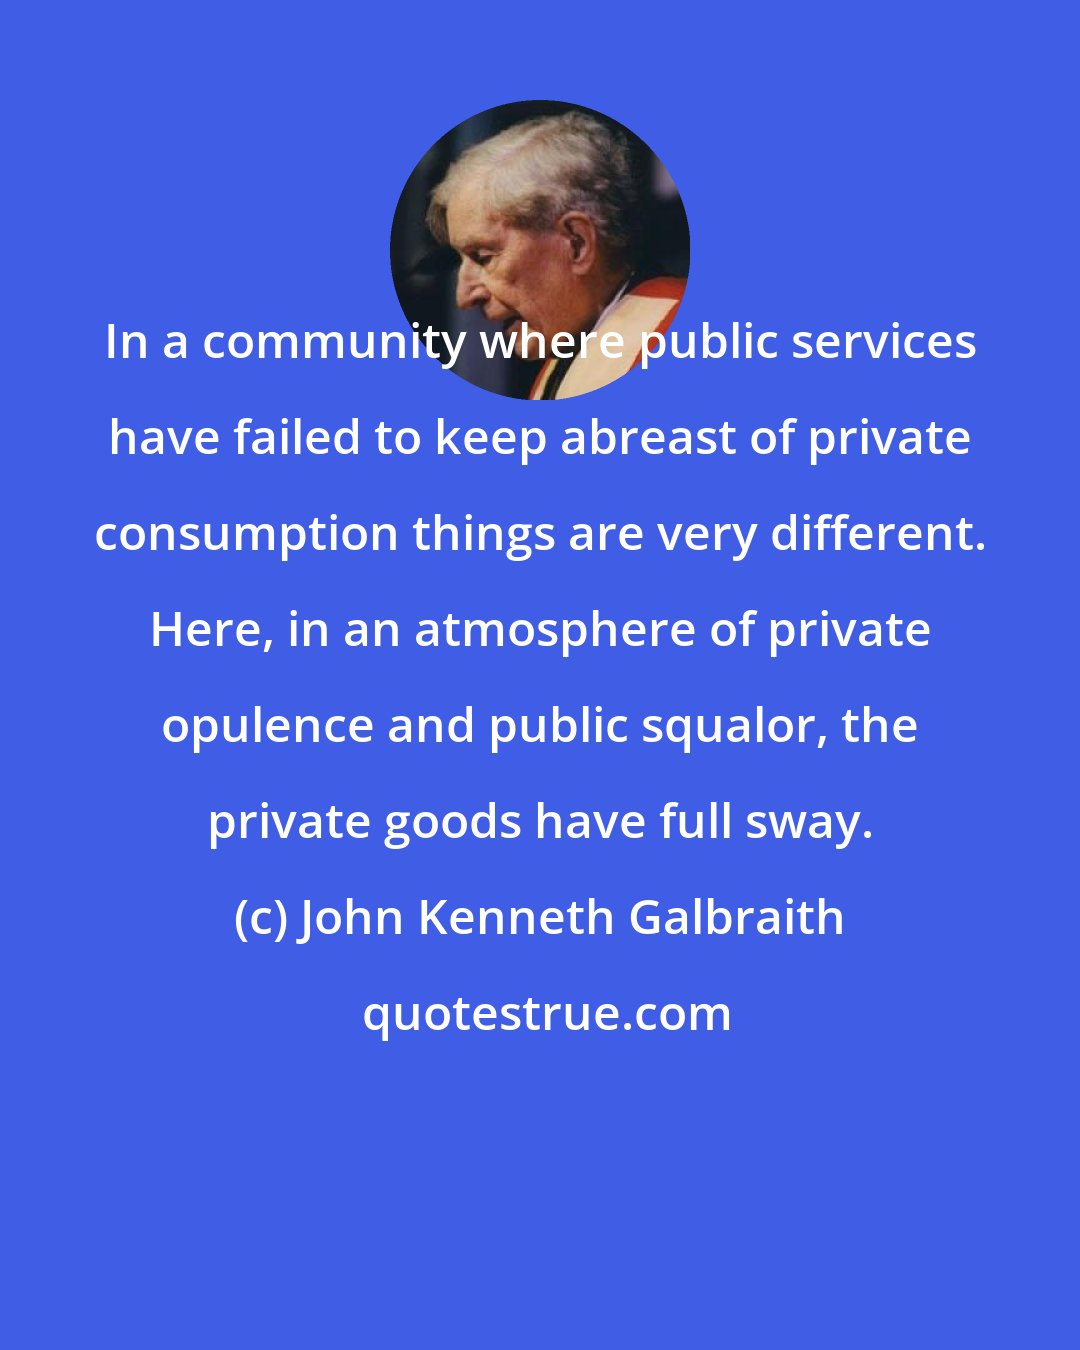 John Kenneth Galbraith: In a community where public services have failed to keep abreast of private consumption things are very different. Here, in an atmosphere of private opulence and public squalor, the private goods have full sway.